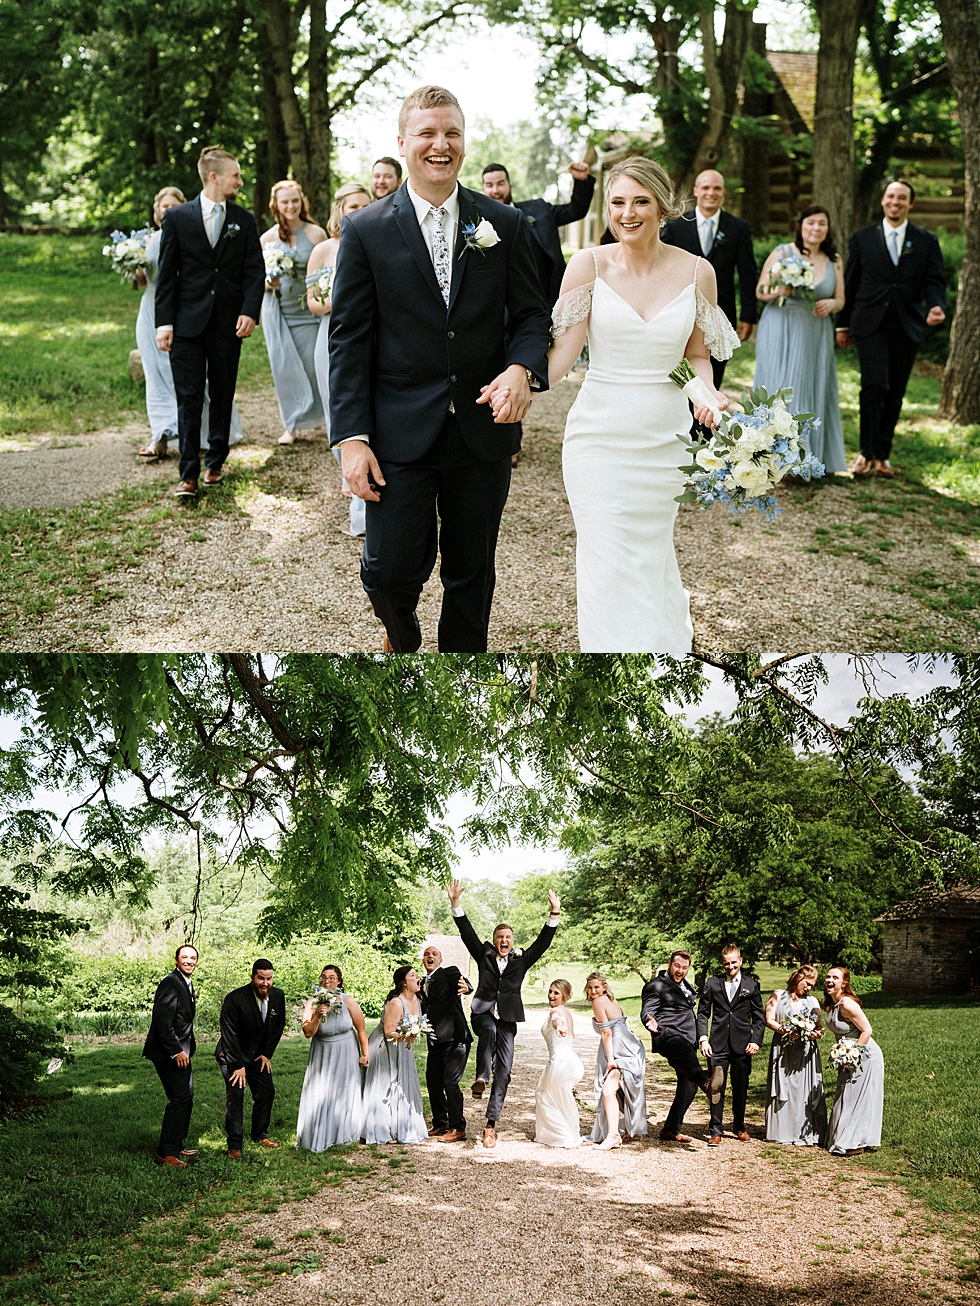  Southern wedding party elated for the bride and grooms big day at Locust Grove in Louisville Kentucky. spring wedding dress bridesmaids groomsmen Locust Grove Louisville photographer Kentucky wedding photography by Lauren outdoor wedding bride and g